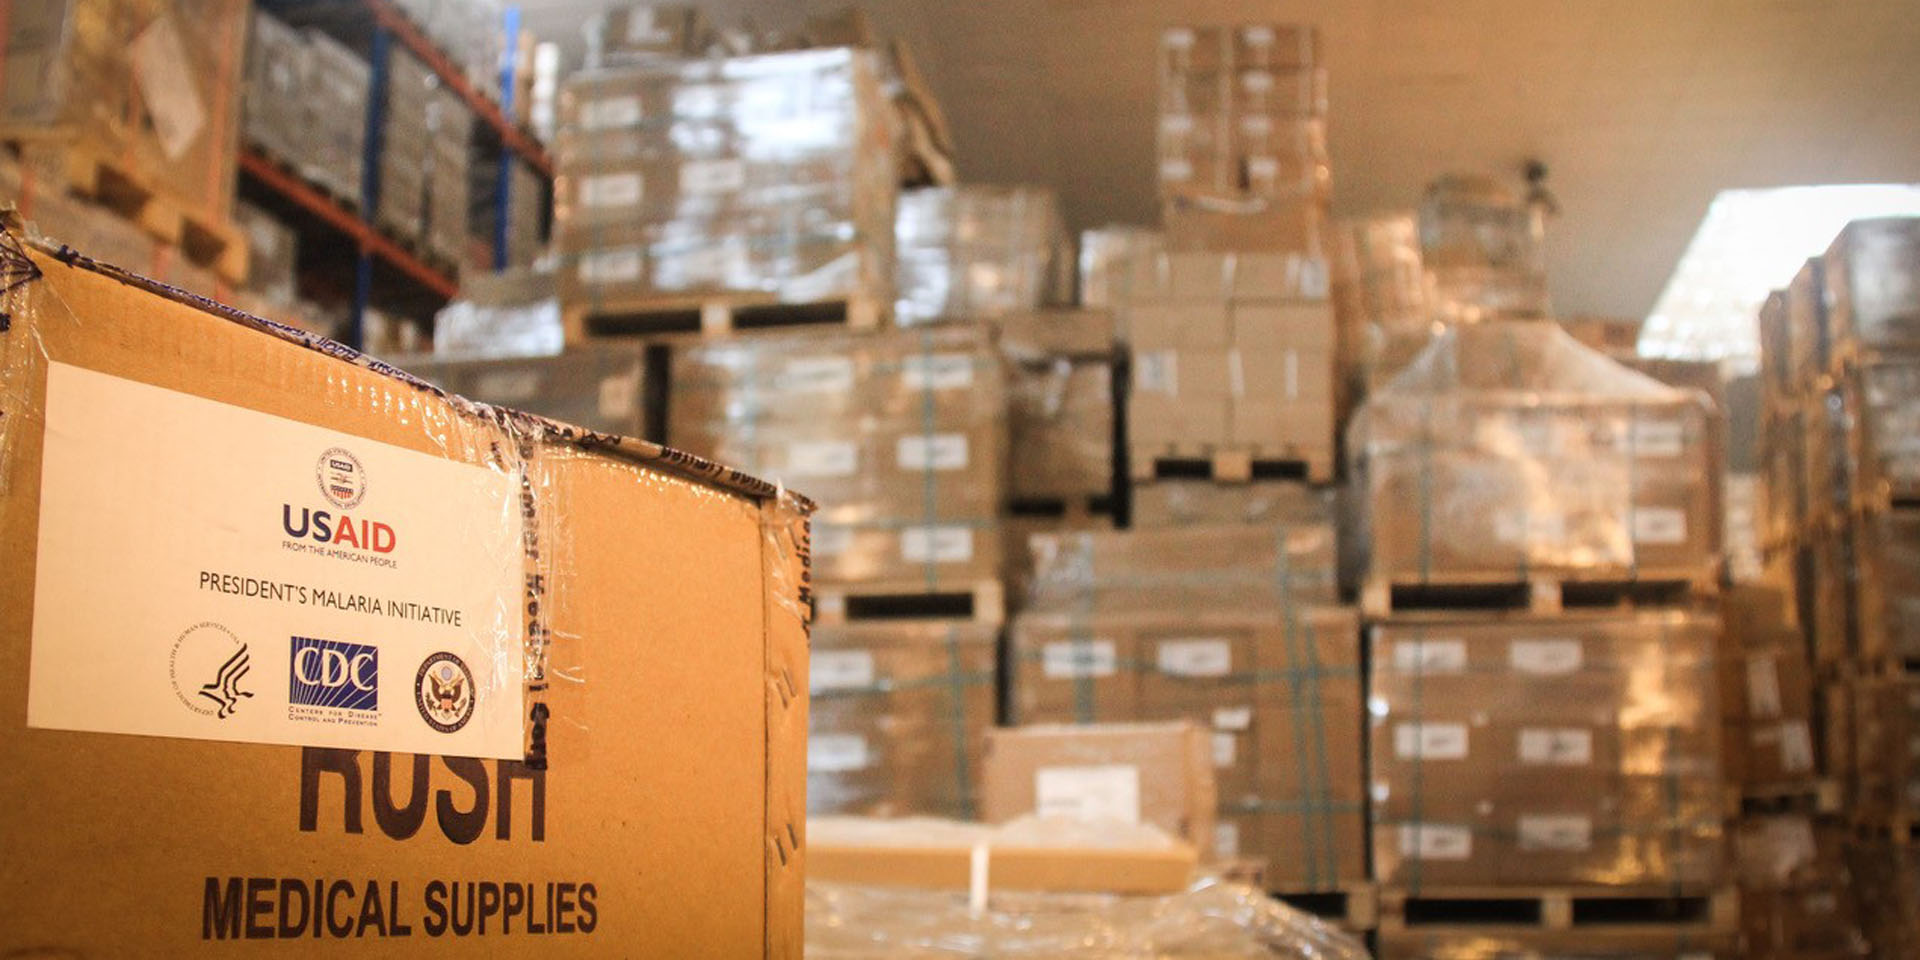 A warehouse filled with pallets of cardboard boxes marked with the text 